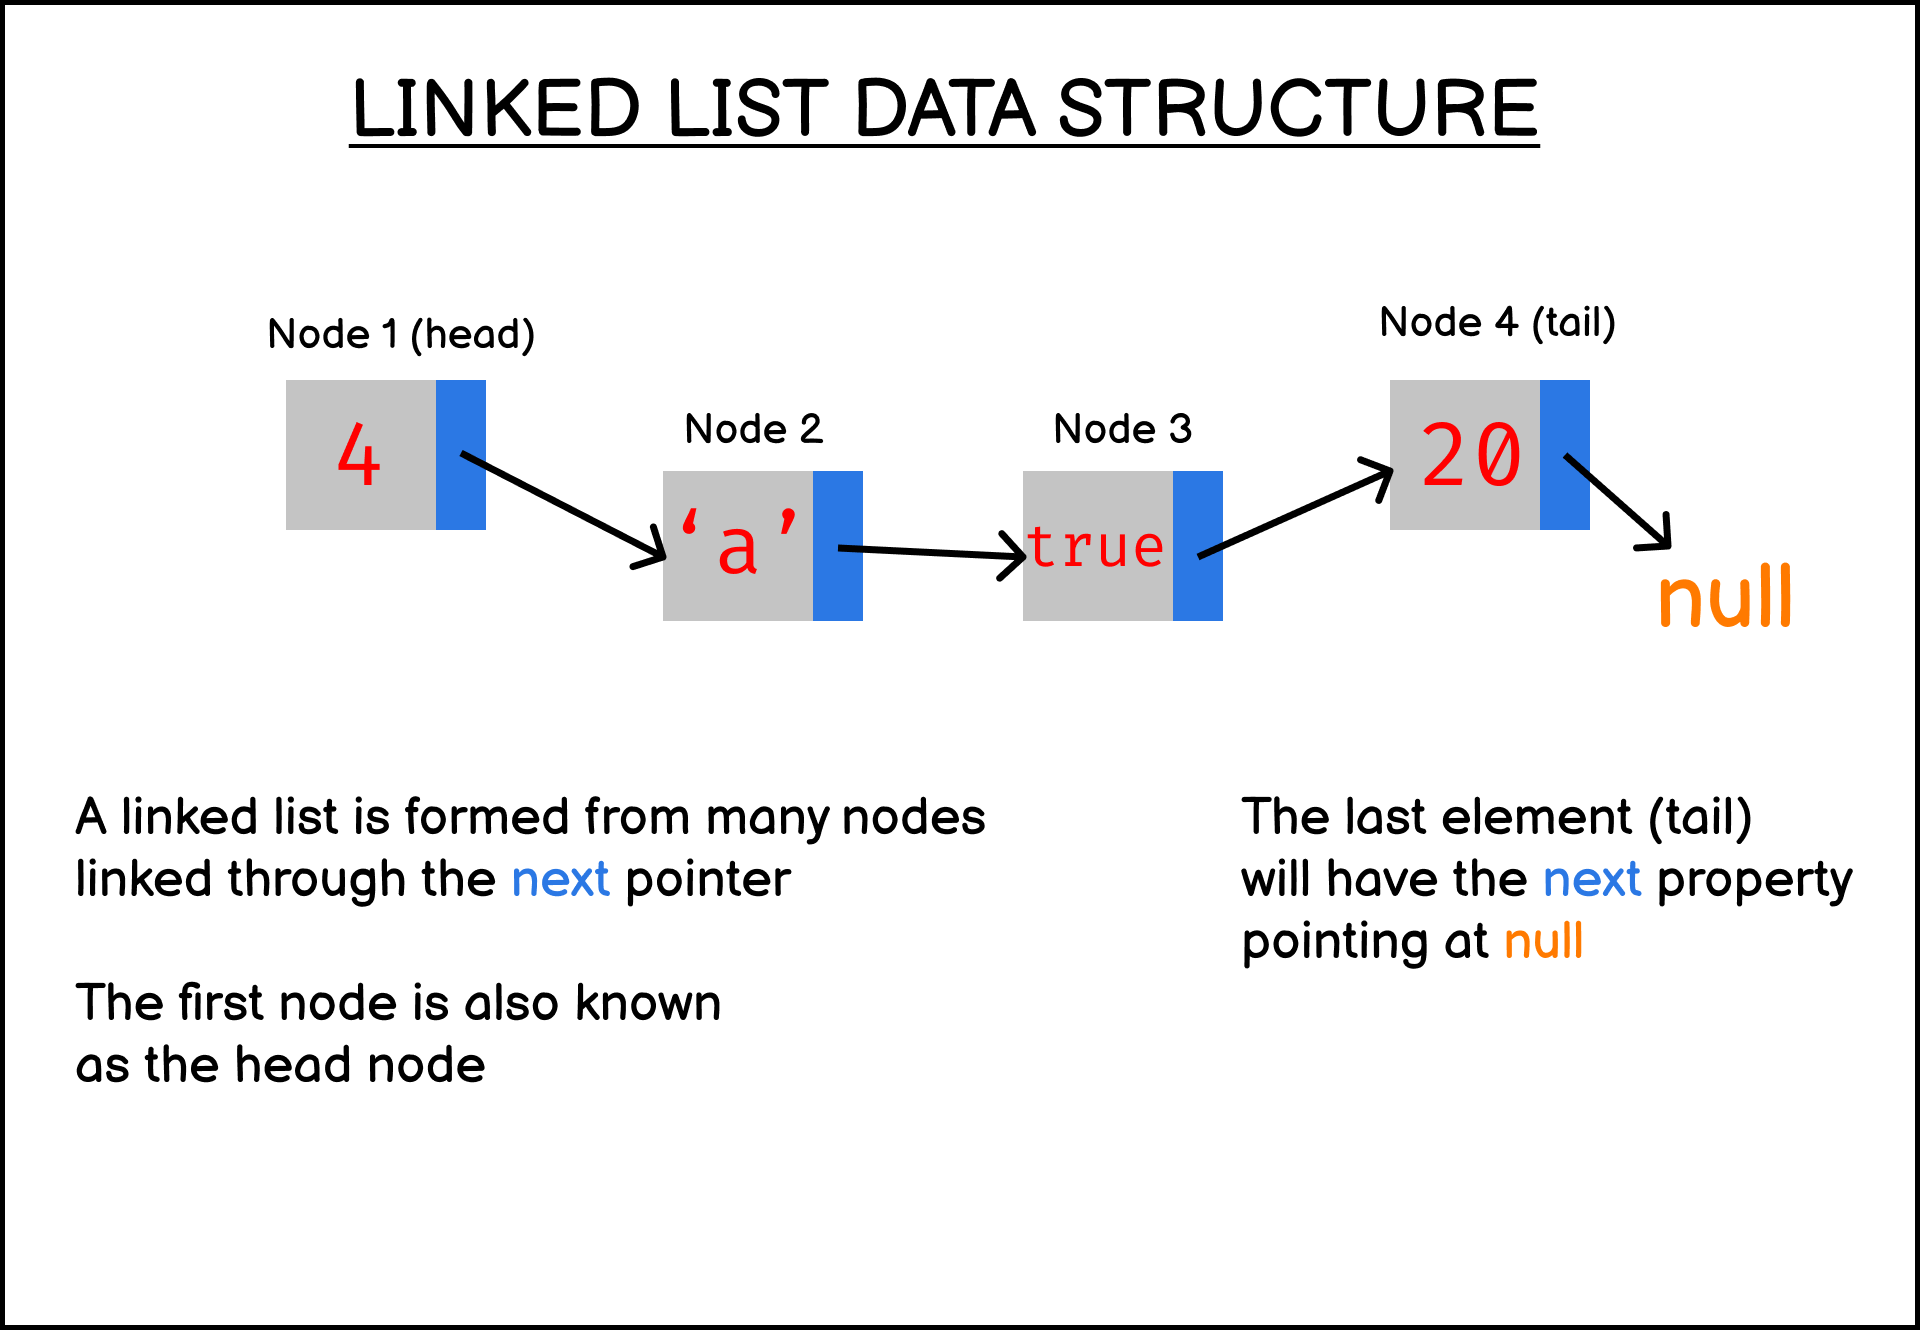 Linked list data structure illustrated